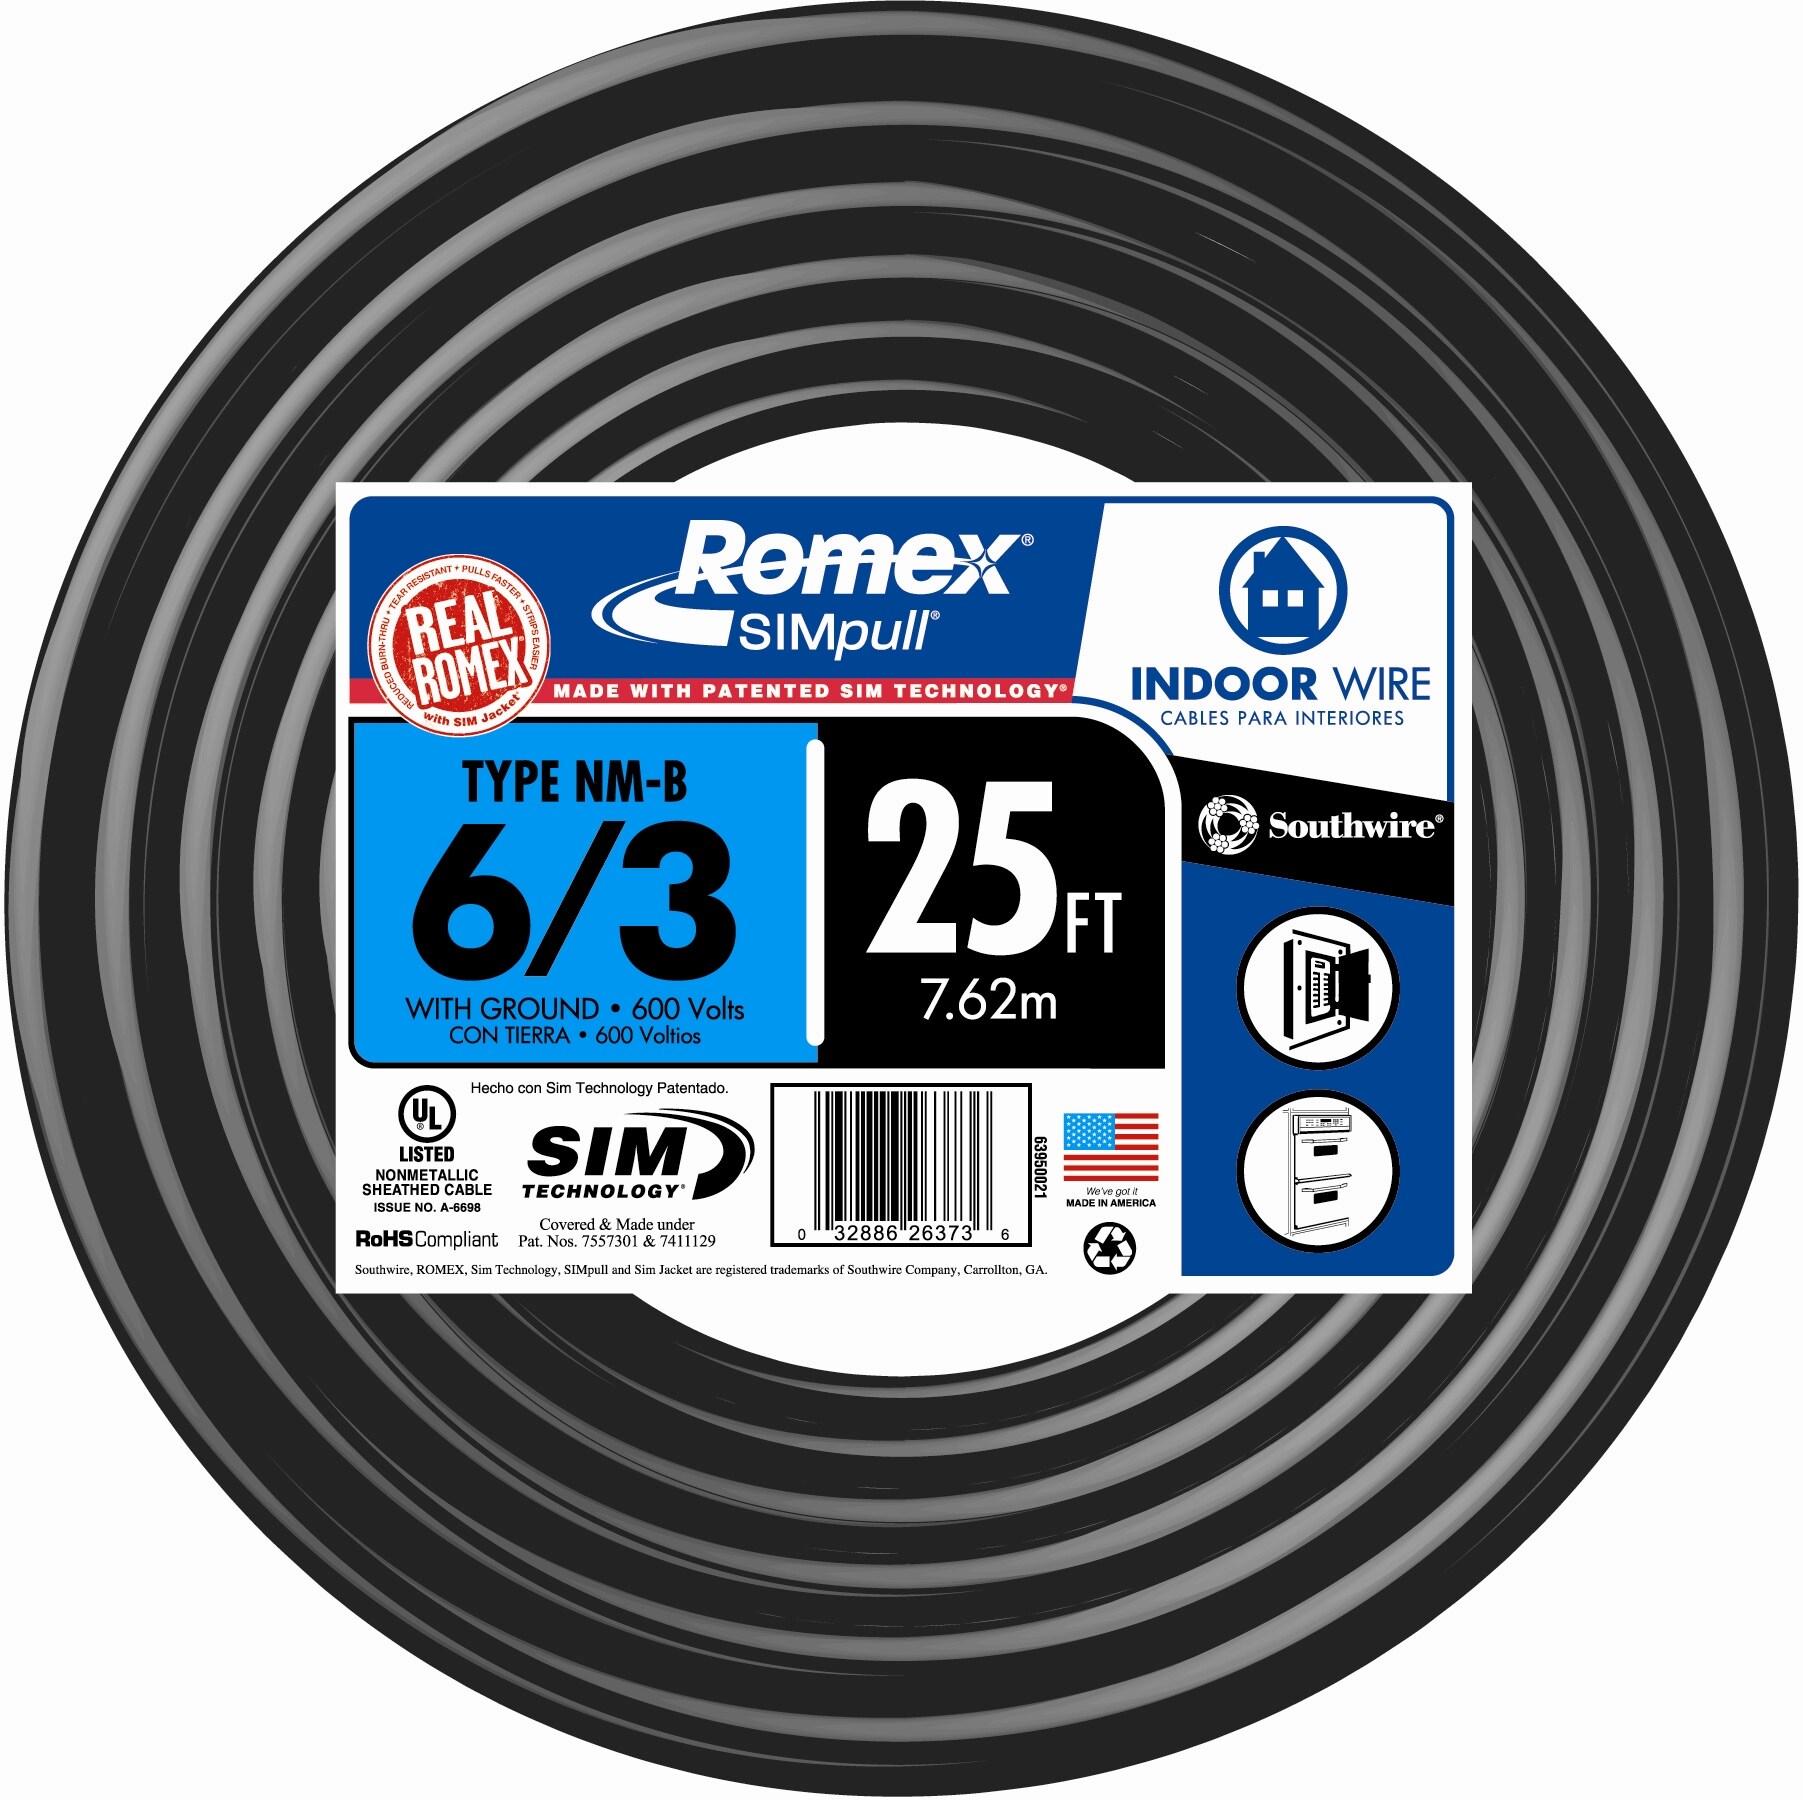 ALL LENGTHS AVAILABLE 6/2 W/GR 40' FT ROMEX INDOOR ELECTRICAL WIRE 